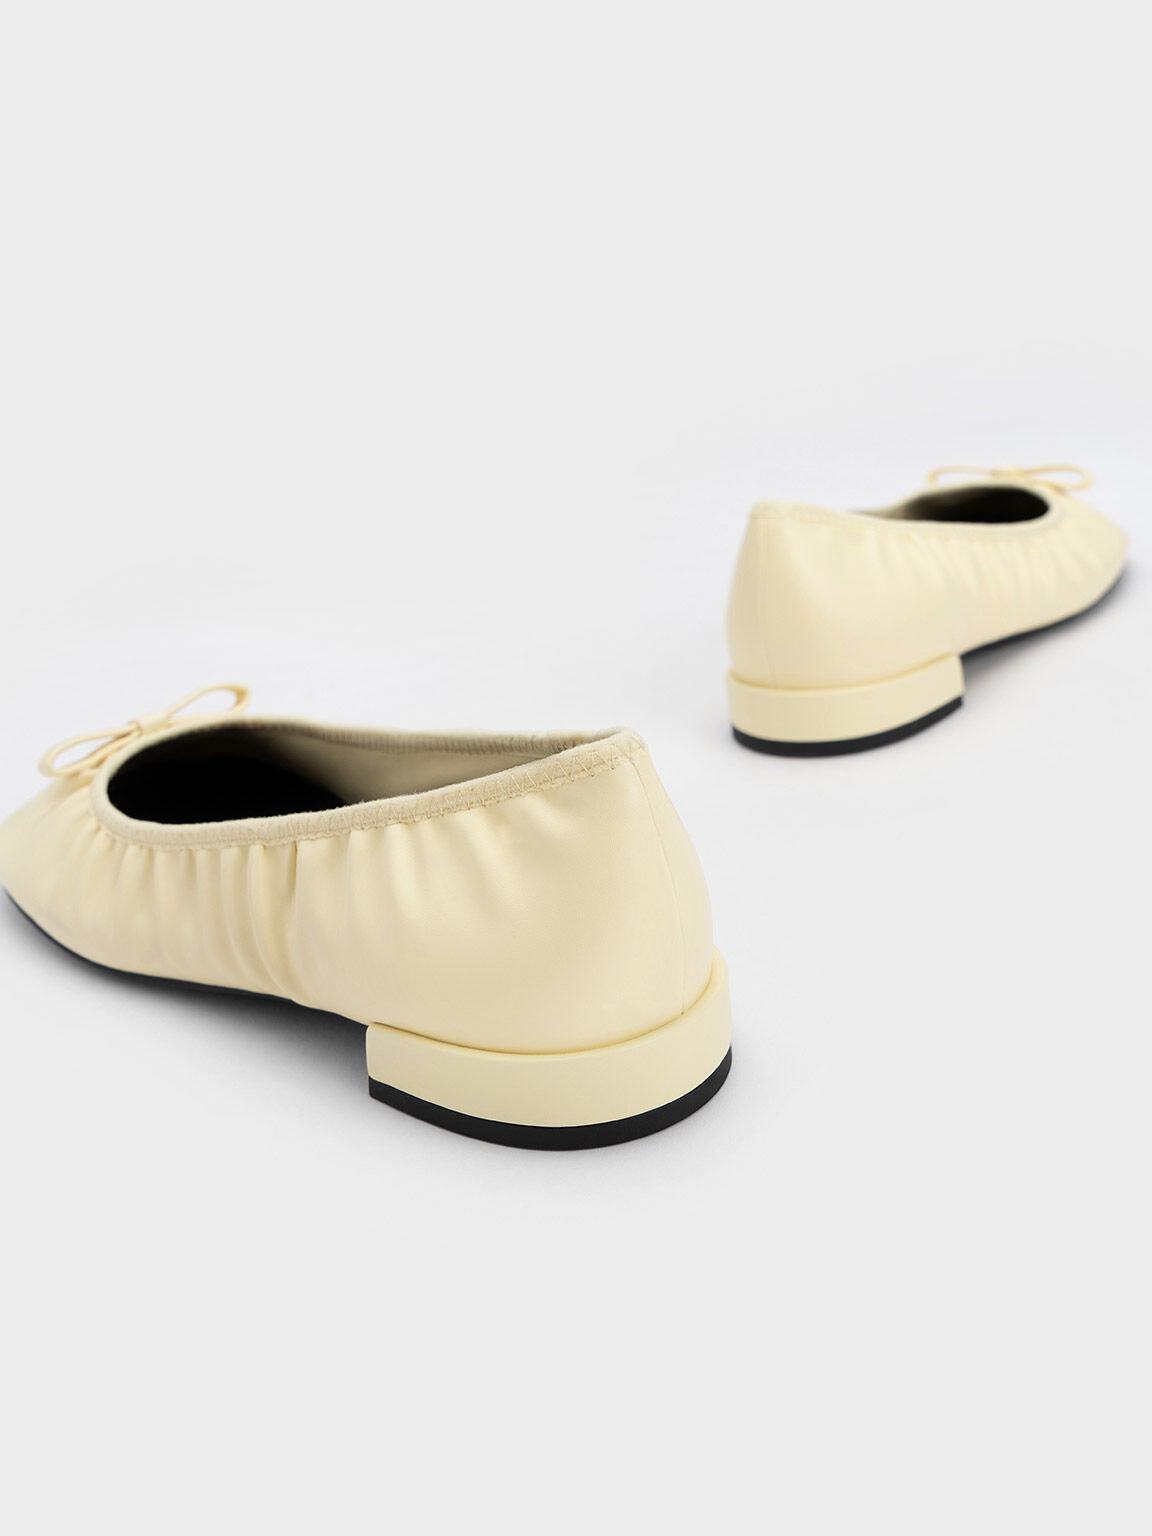 Bow Ruched Ballerinas, Butter, hi-res